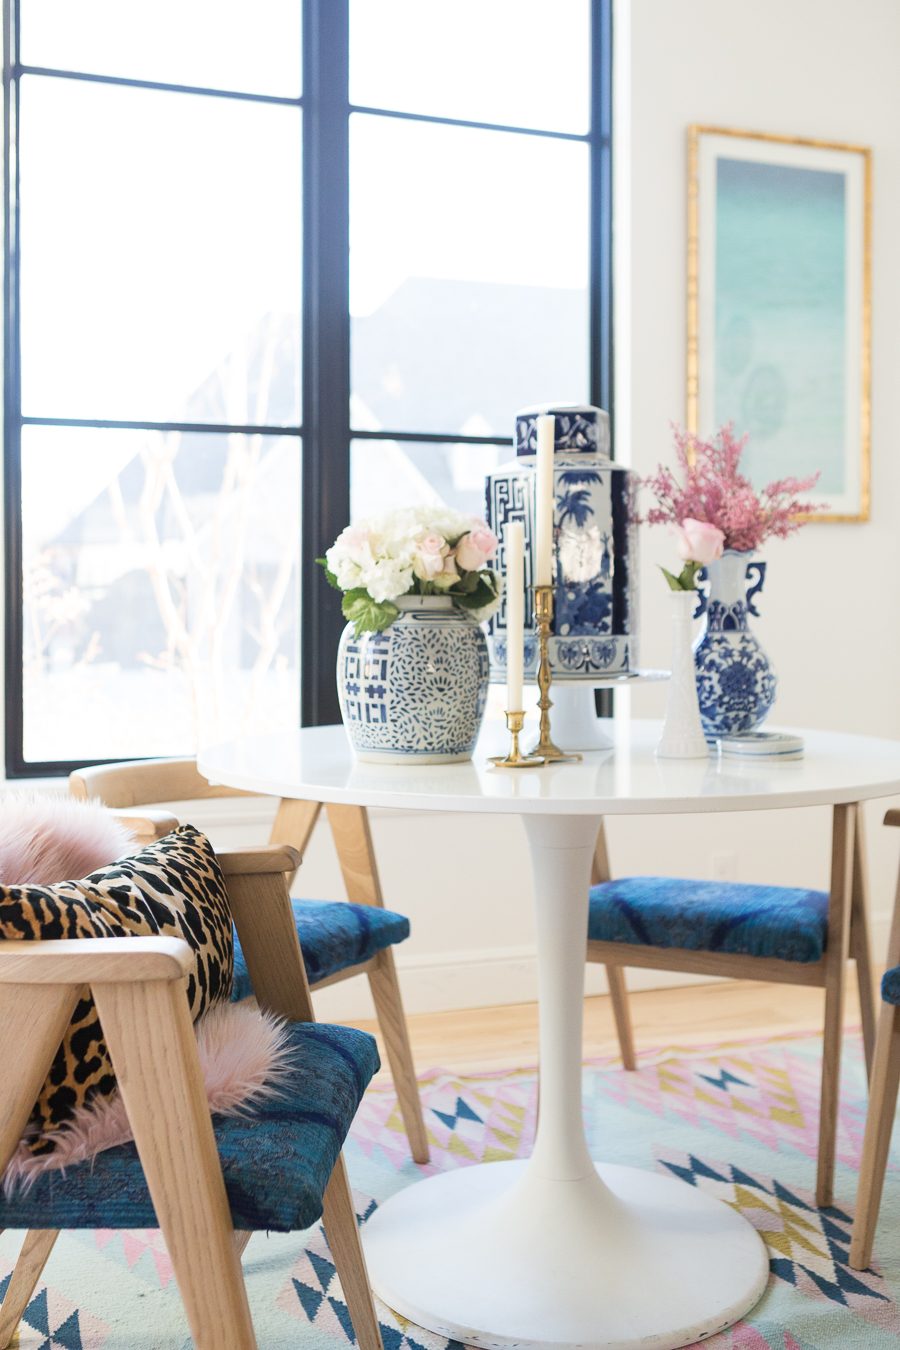 Rooms We Love Home Tour Navy and Pink Modern Glam Breakfast Nook Glittler Guide elodie rug blue and white tabletop vases gold candlesticks black windows wishbone chairs white round table colorful dining room rugs-3.jpg-1.jpg